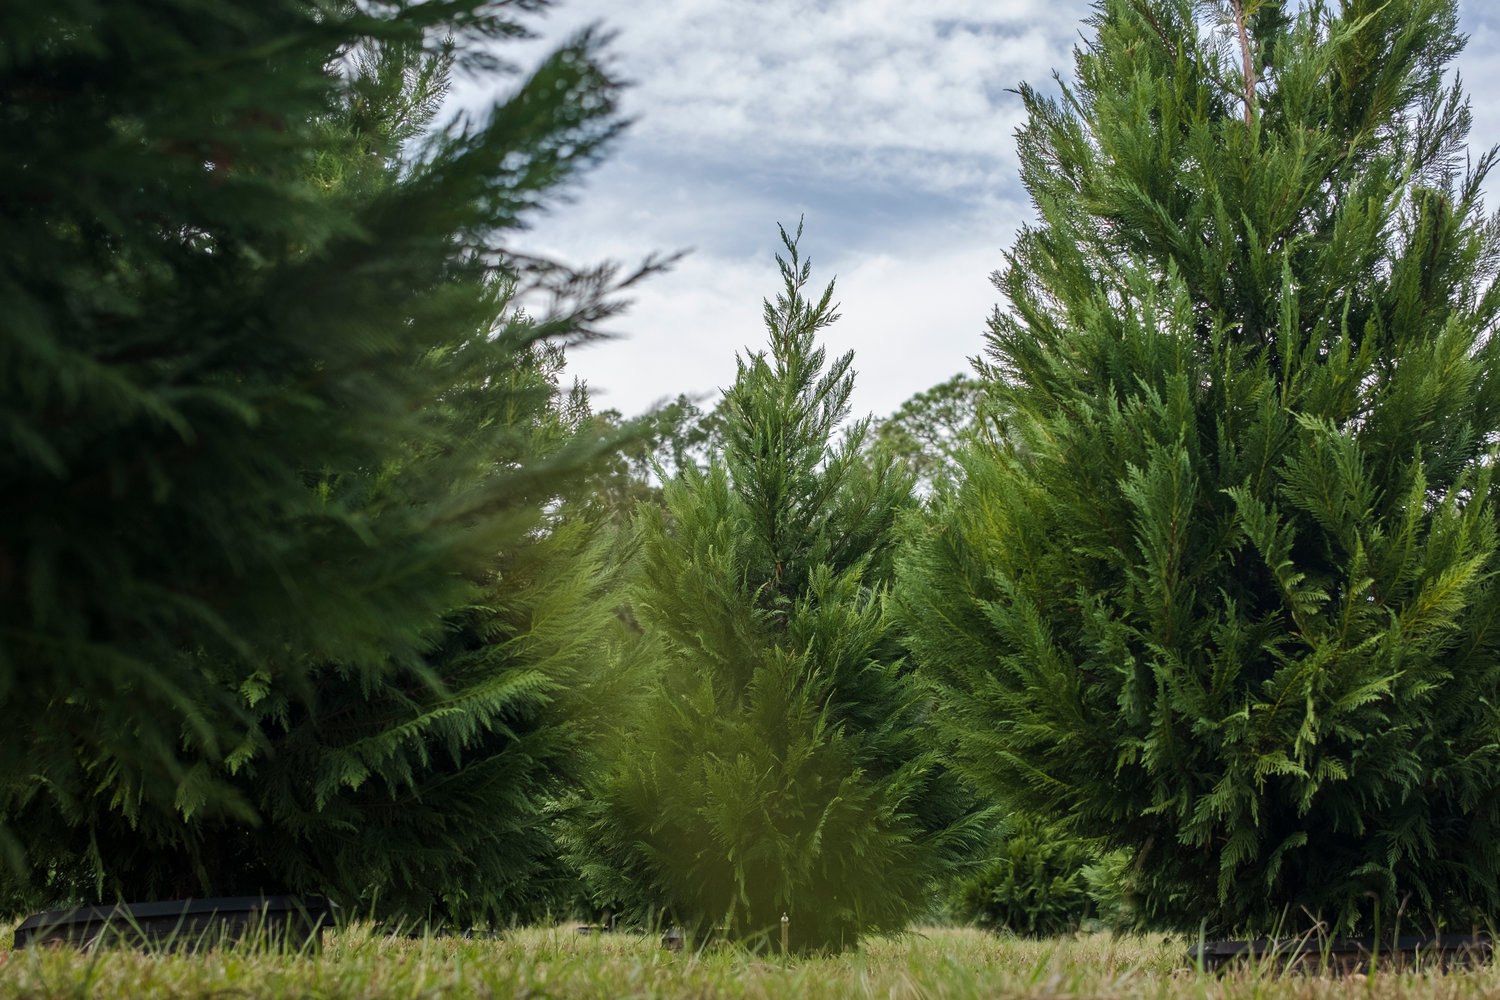 MICAH GREEN / GULF COAST MEDIA

Container-grown, live Christmas trees at Fish River Christmas Tree Farm on Wednesday.